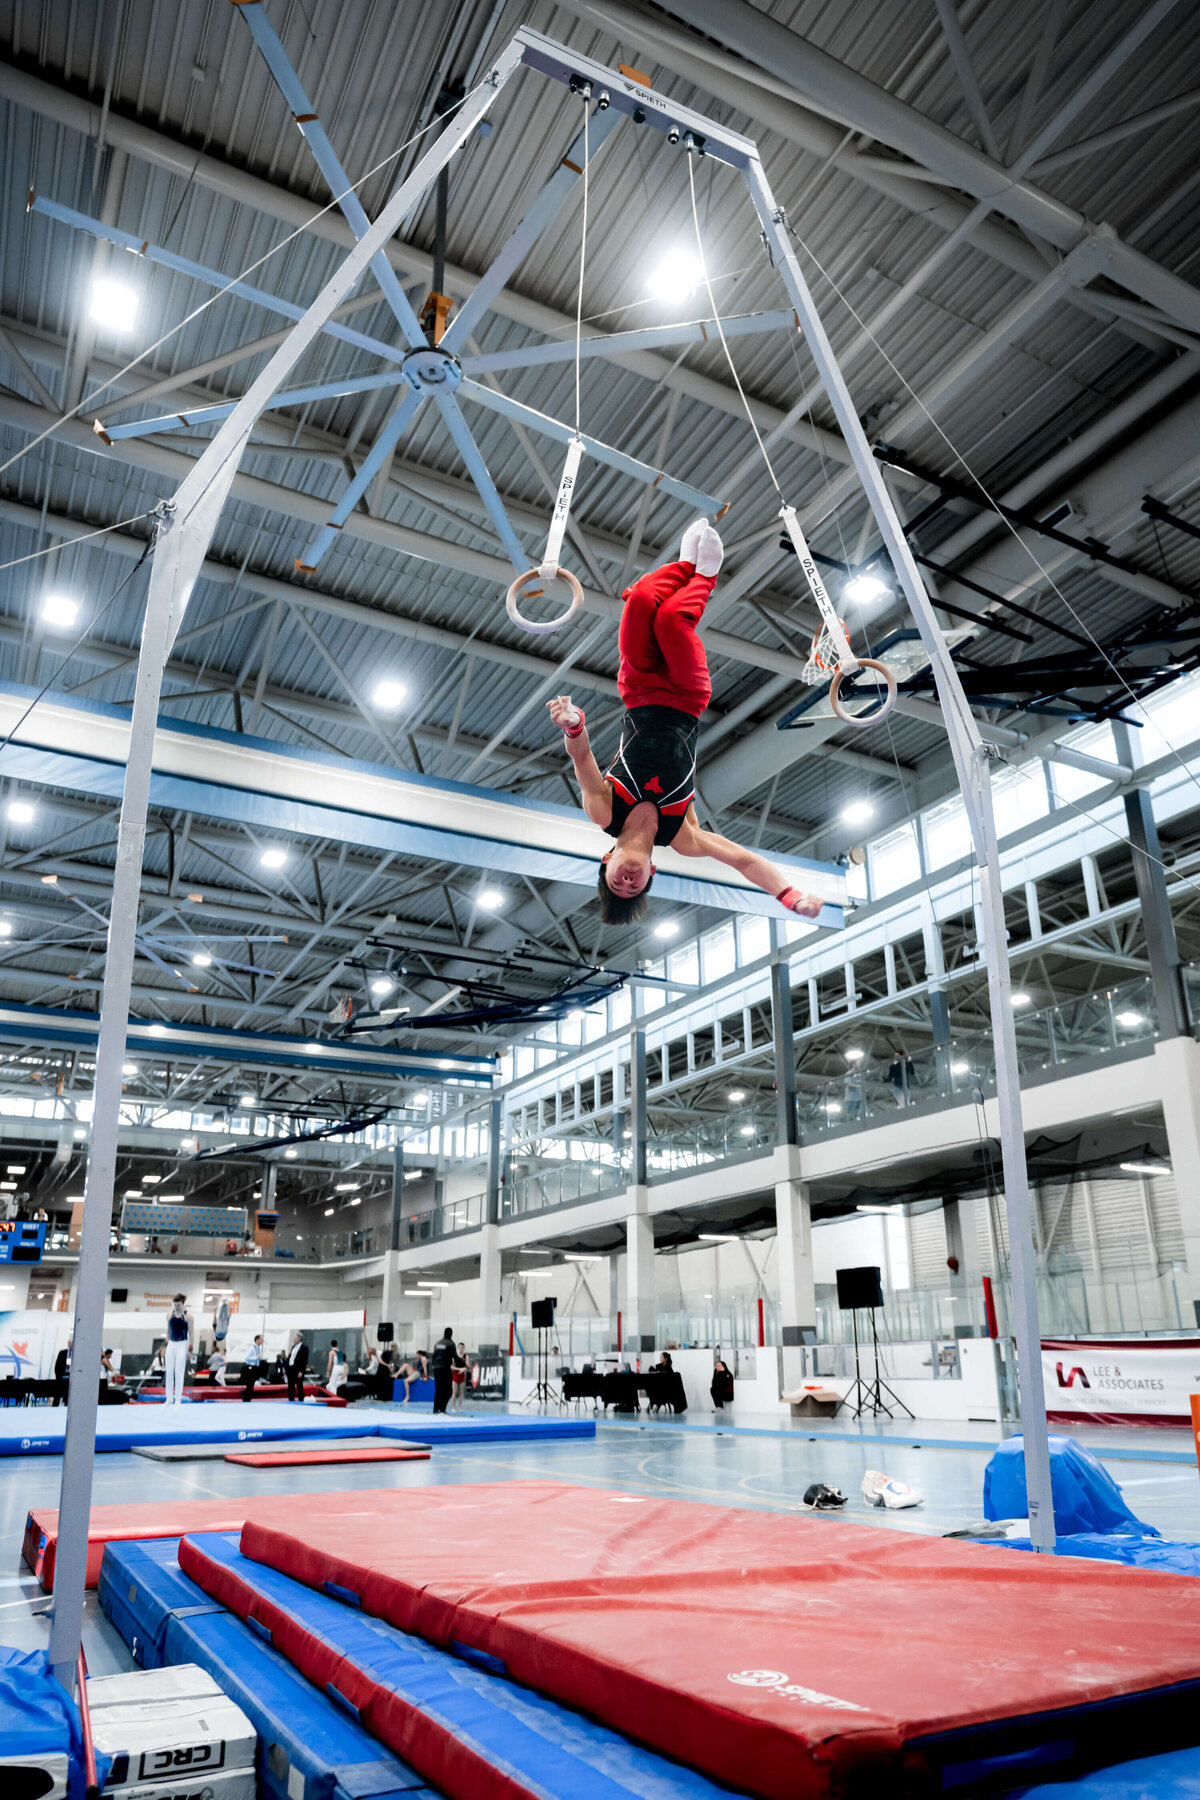 Photo by Luke O'Geil taken at the 2023 inaugural Grizzly Classic men's artistic gymnastics competitionA9_00493